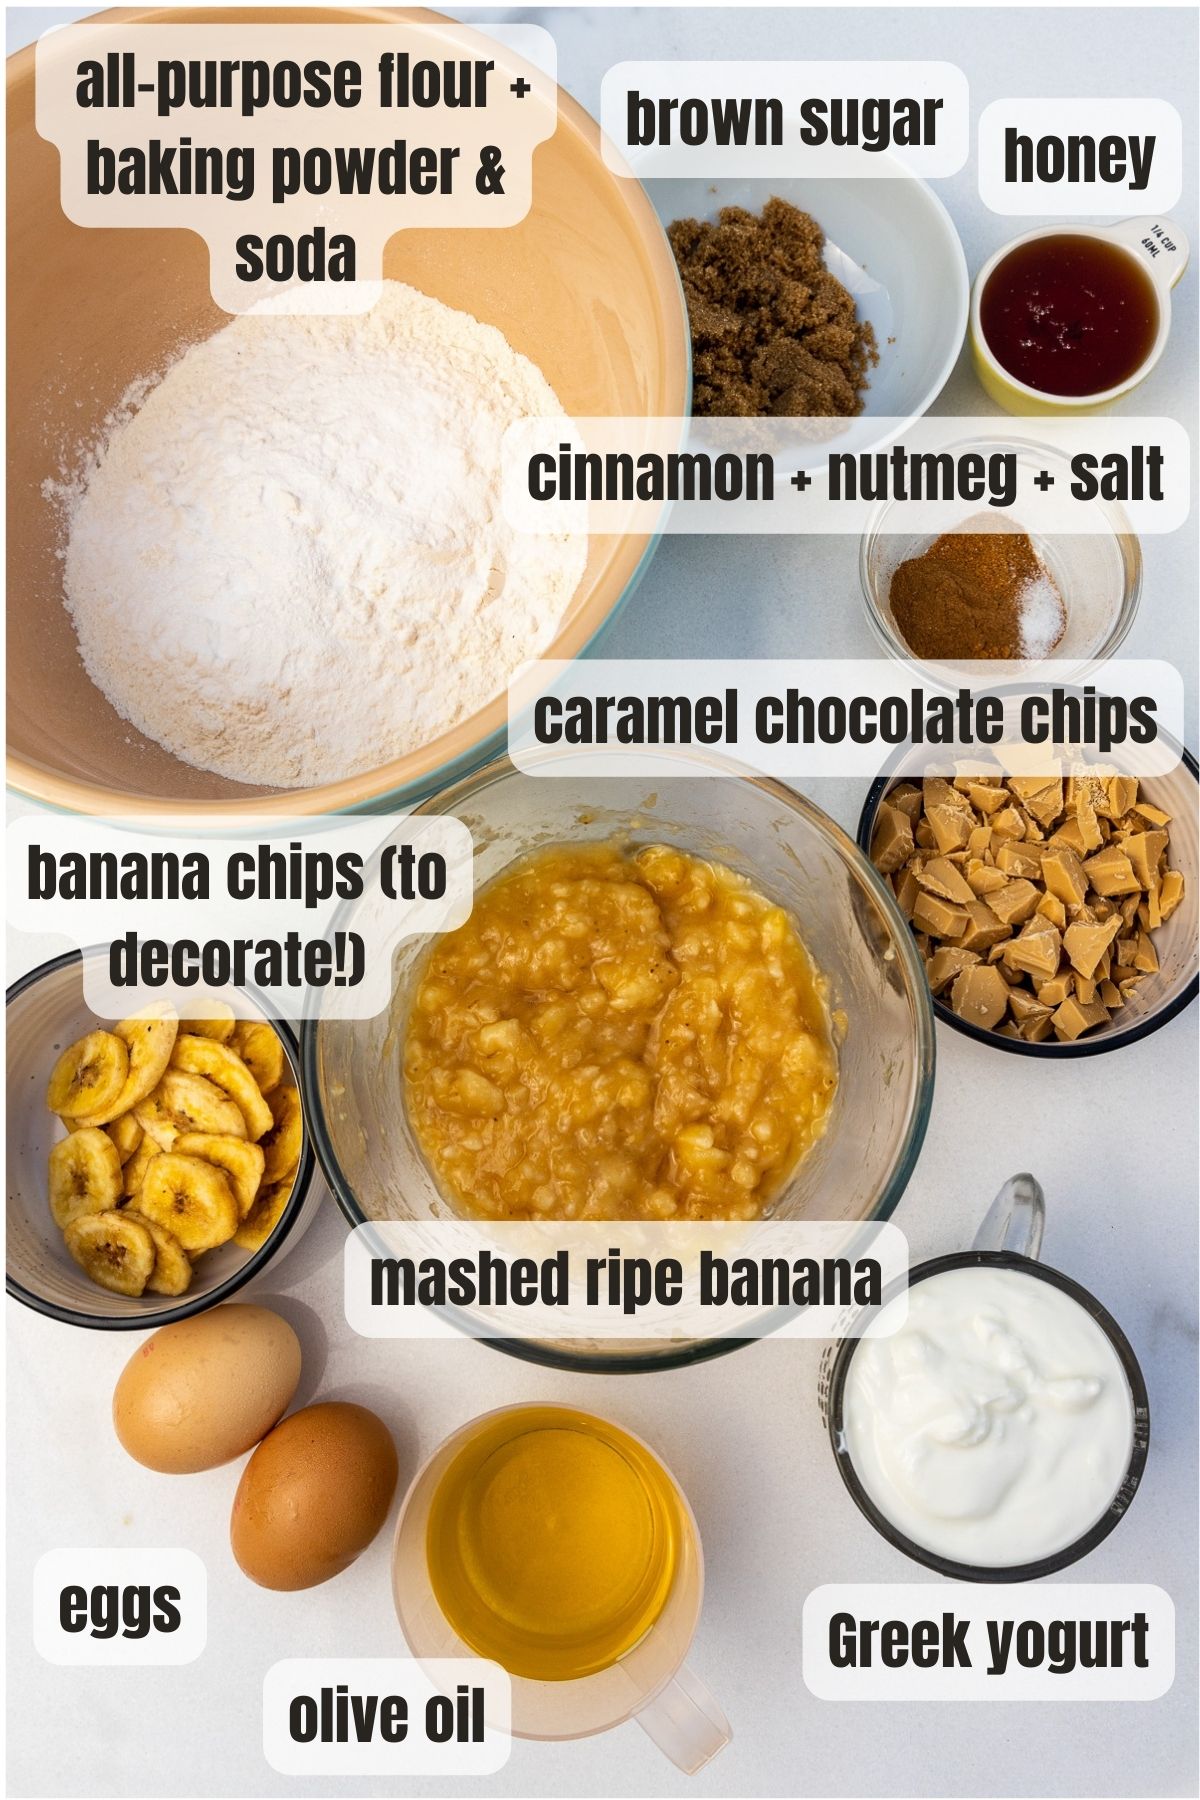 overhead view of all the ingredients for Greek yogurt banana muffins including Greek yogurt, all-purpose flour, baking powder, baking soda, eggs, olive oil, brown sugar, honey, spices, and caramel chocolate chips.